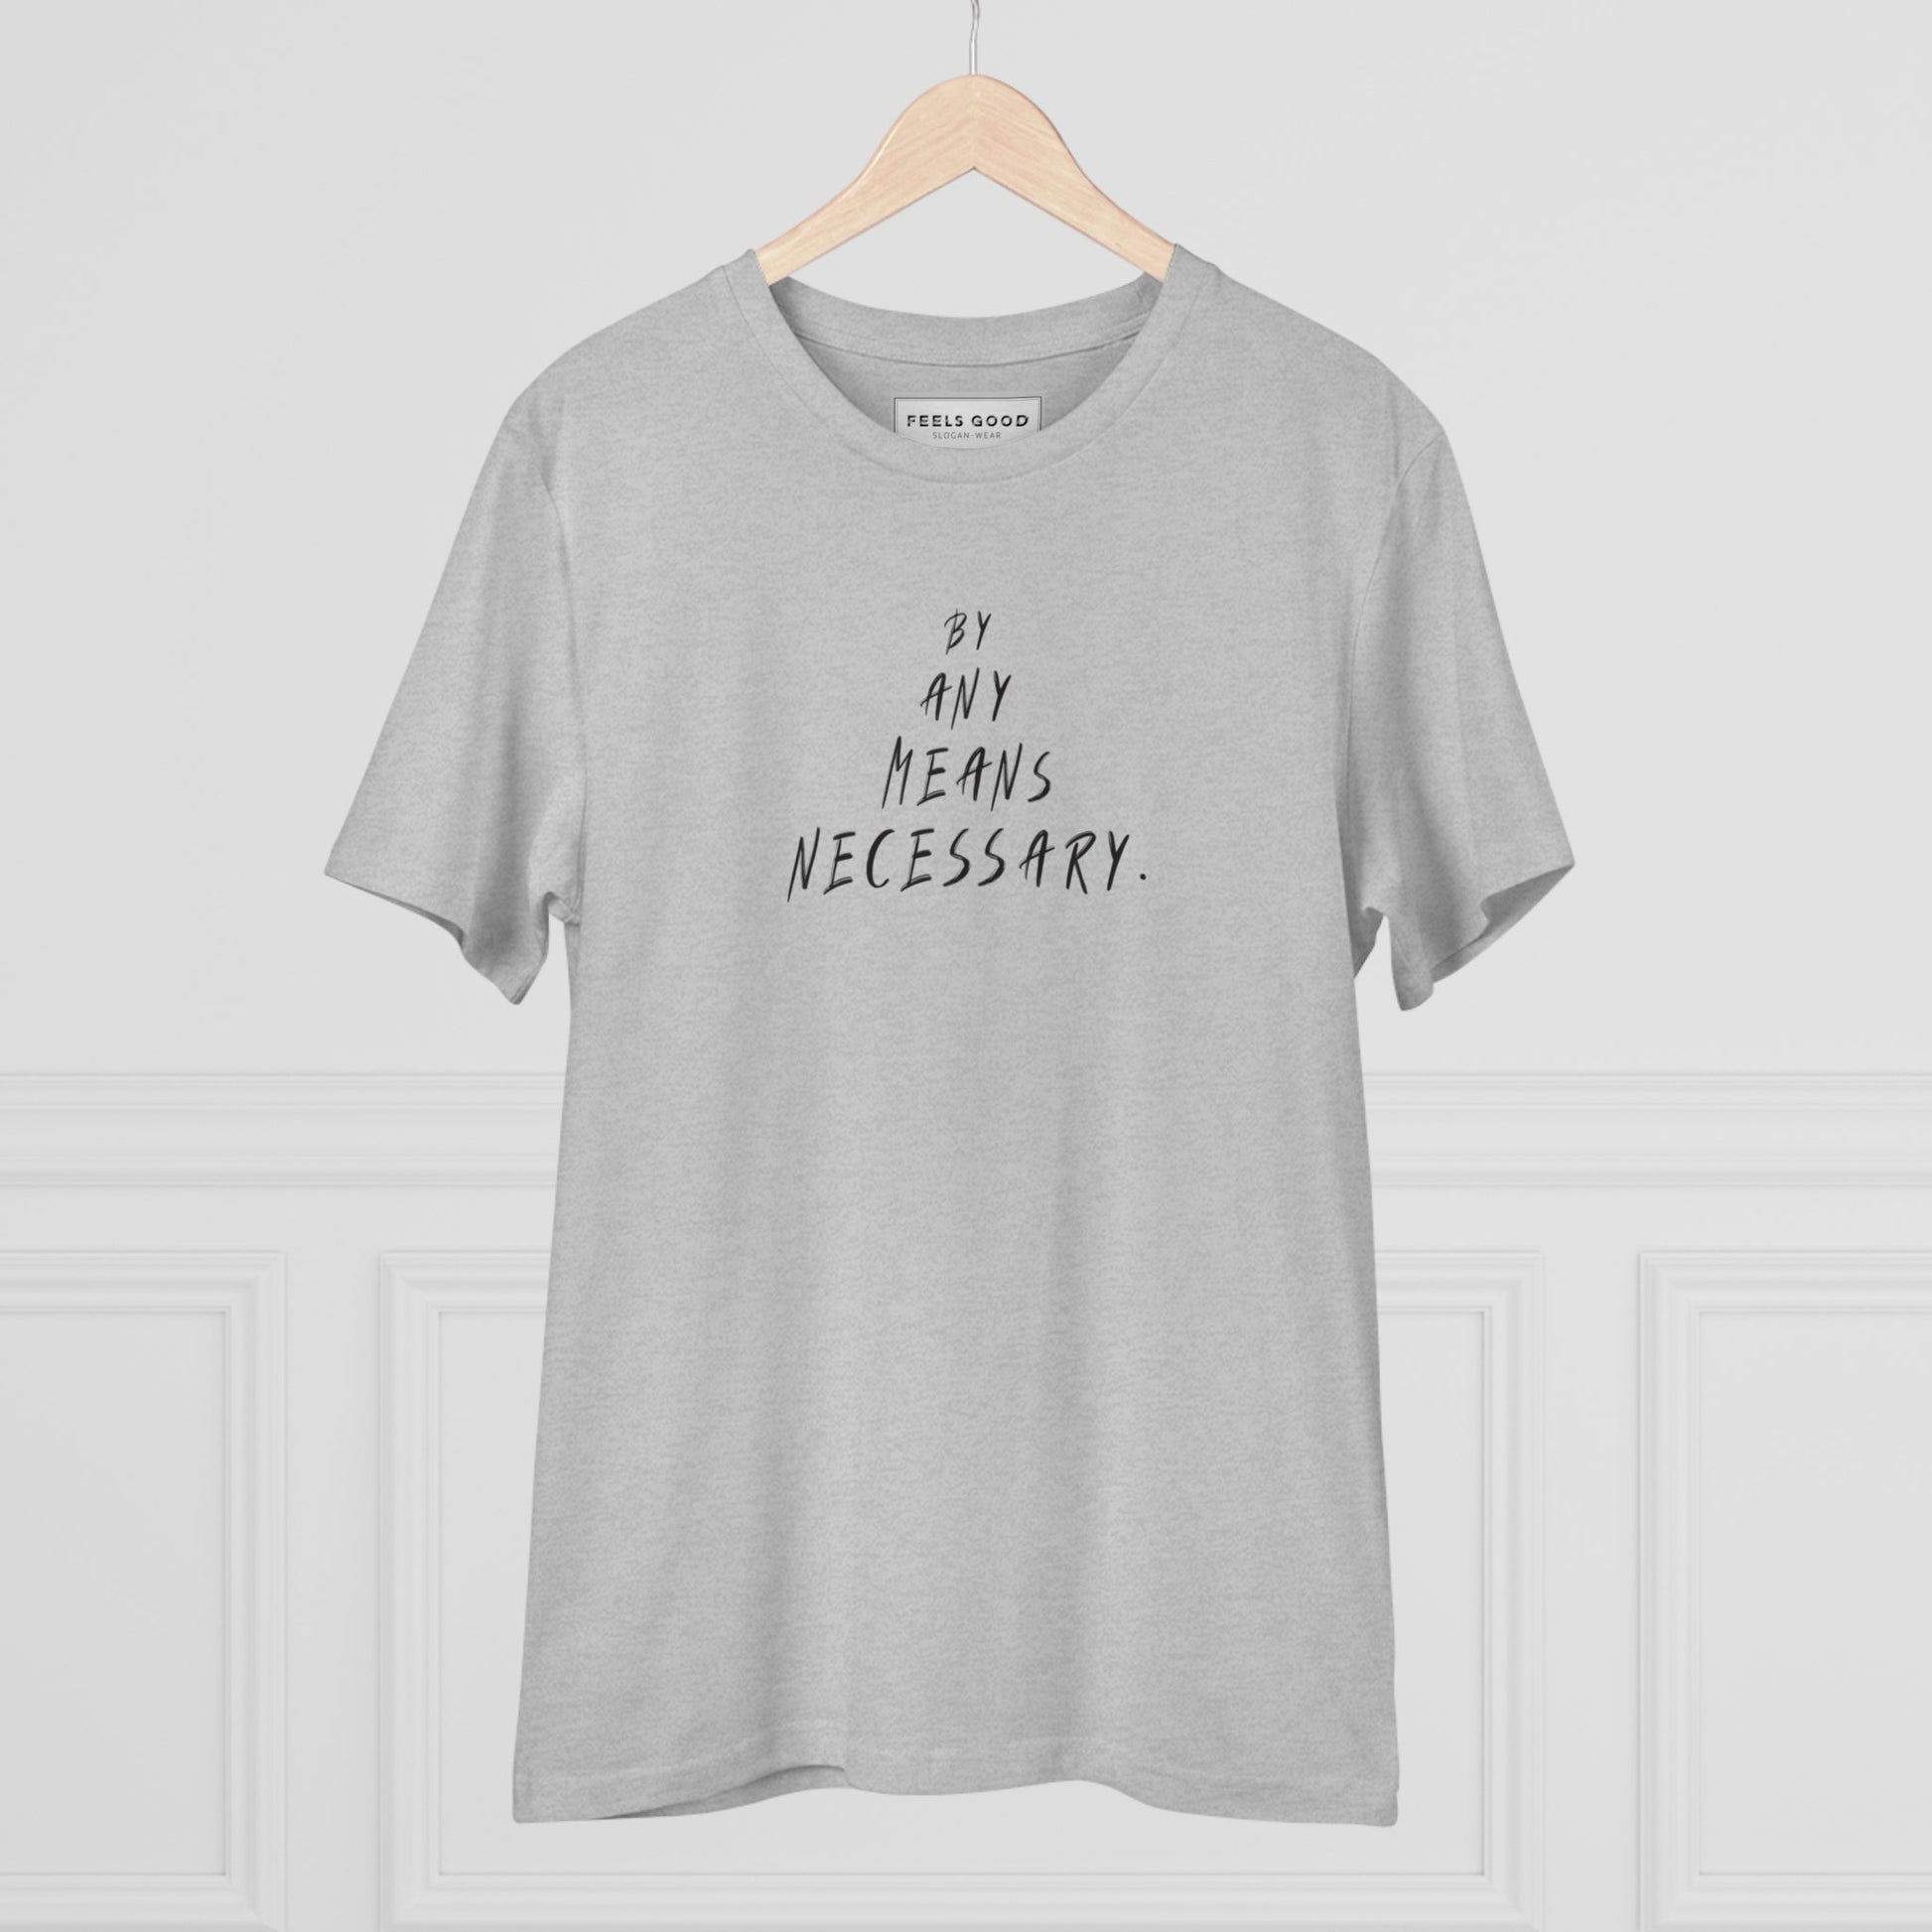 Malcolm X 'By Any Means Necessary' Organic Cotton T-shirt - Cool Tshirt